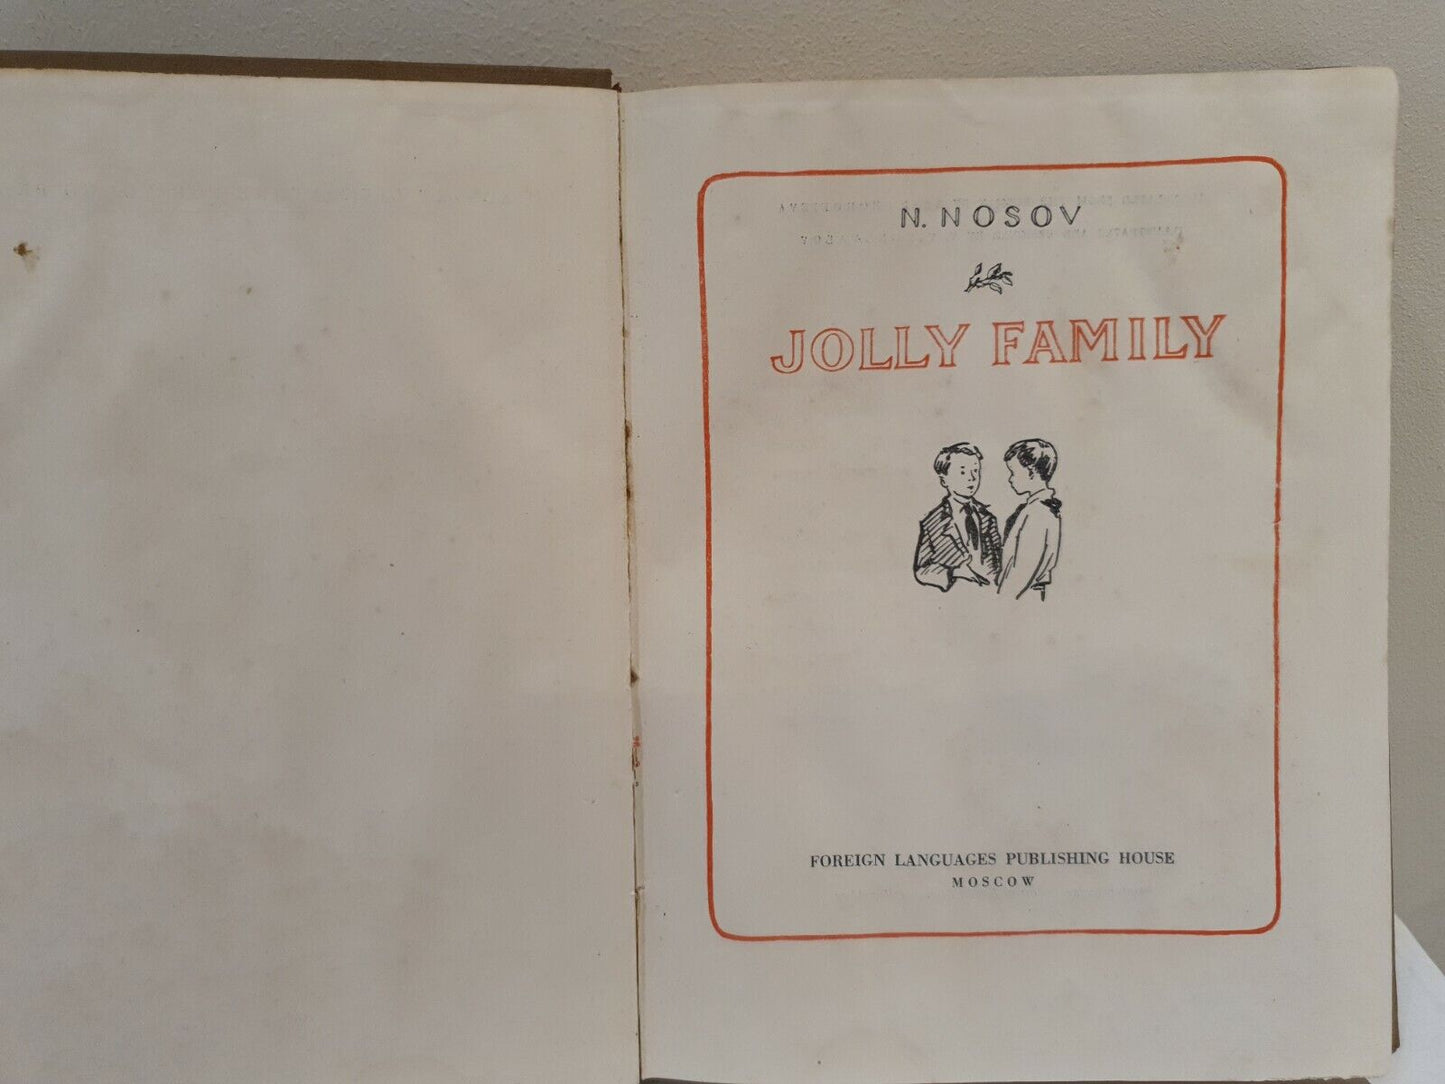 Jolly Family by N Nosov - Foreign Languages Publishing House